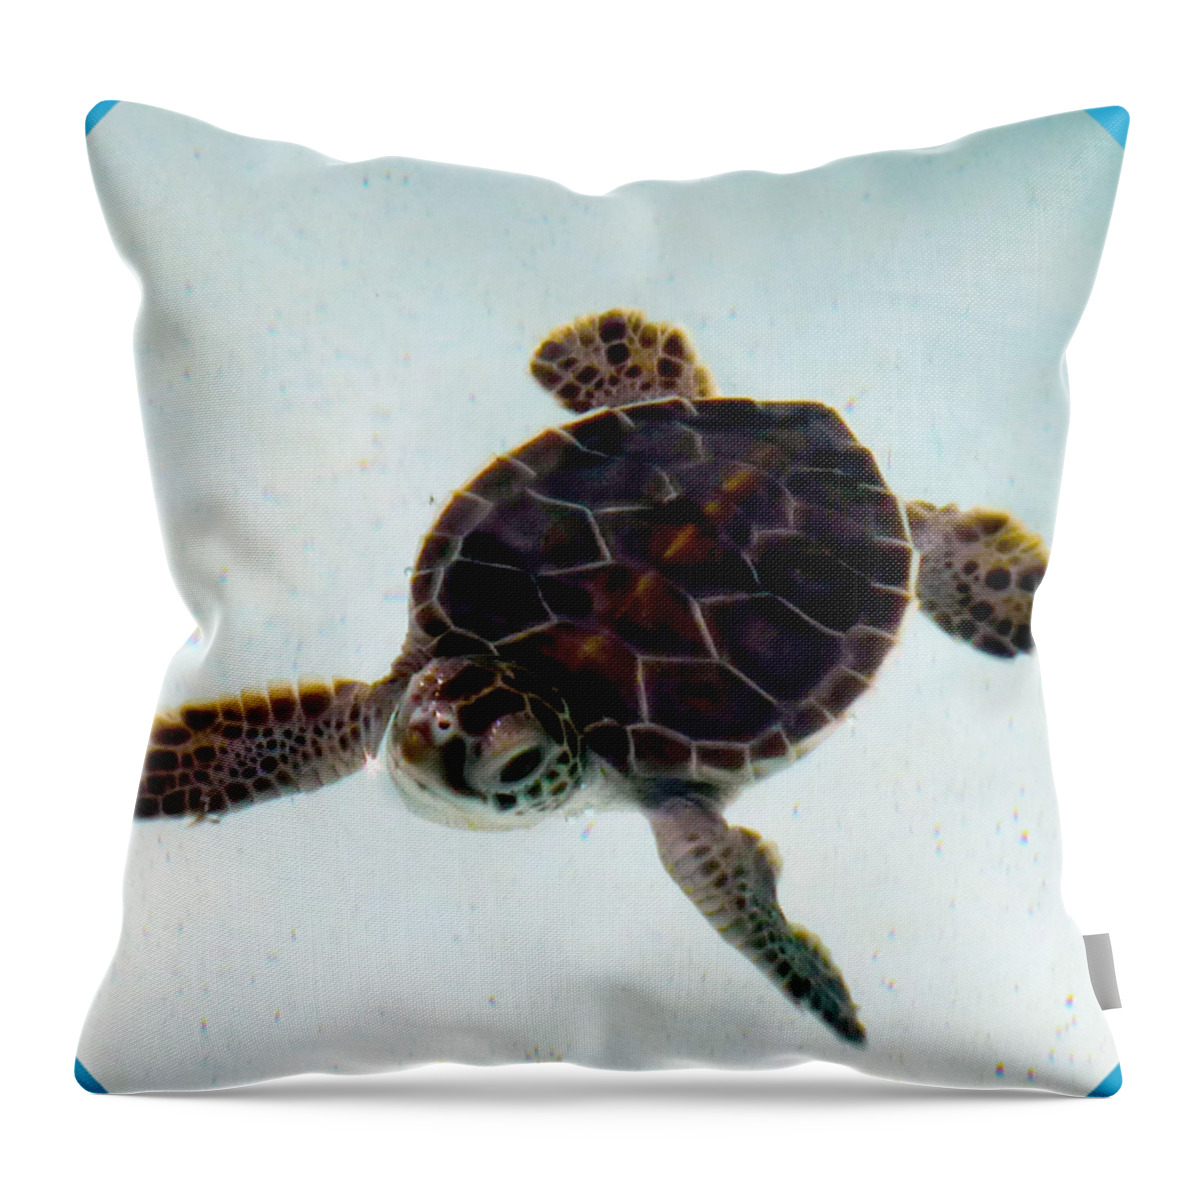 Baby Turtle Throw Pillow featuring the photograph Baby Turtle by Francesca Mackenney